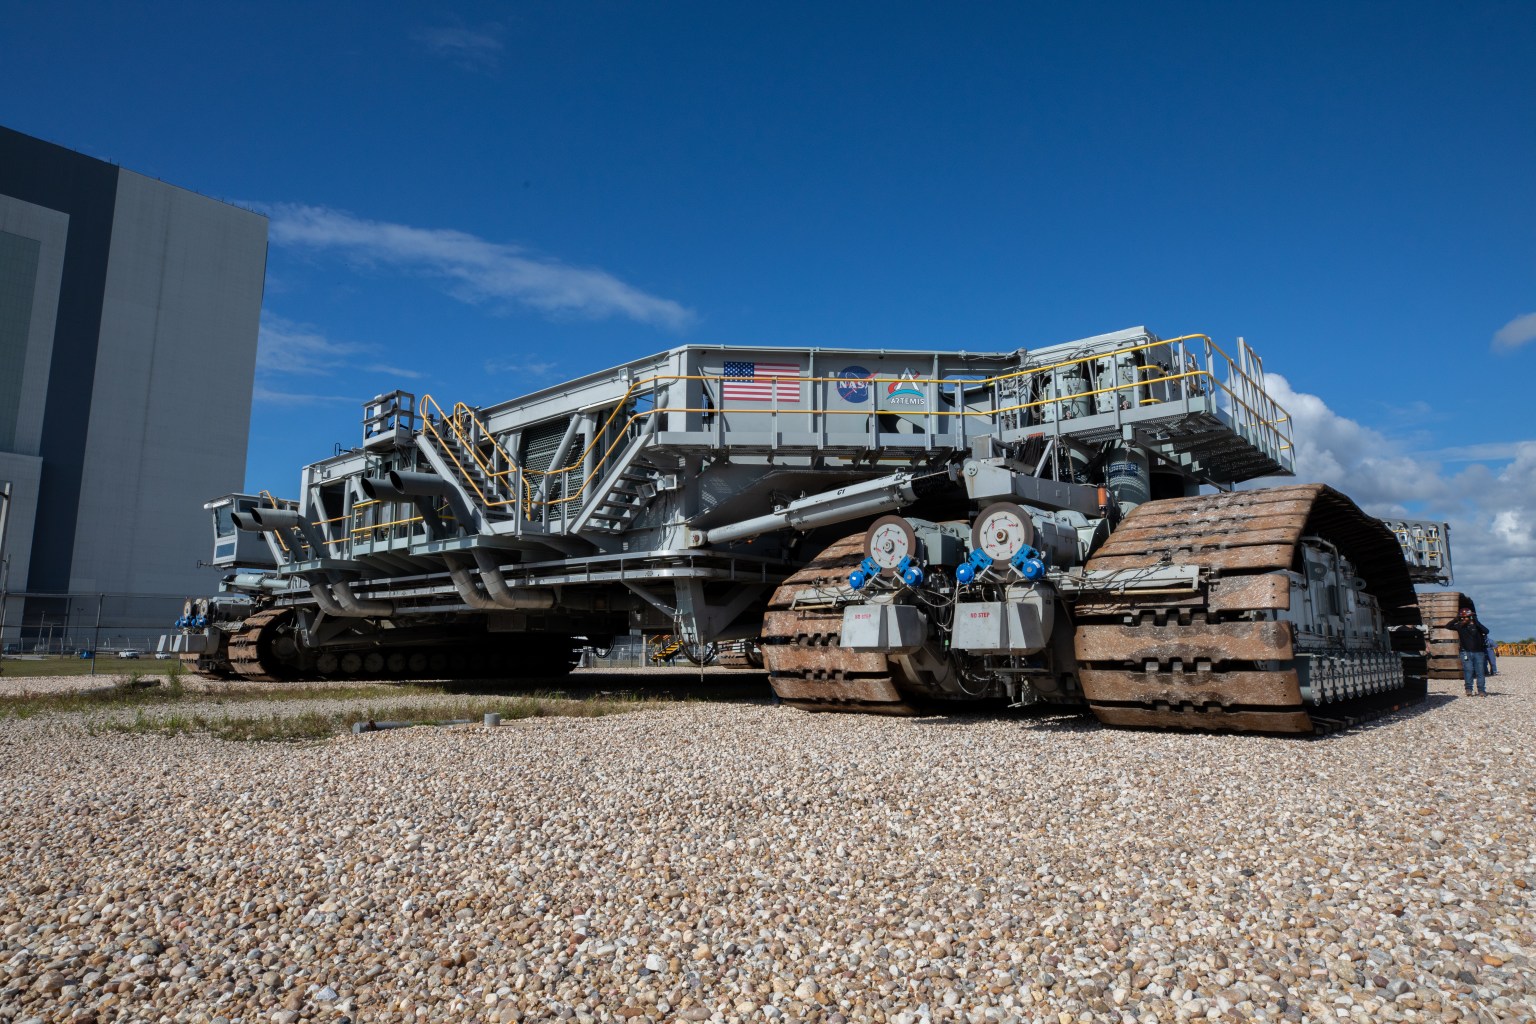 NASA's crawler-transporter 2 is photographed outside near the Vehicle Assembly Building at the agency's Kennedy Space Center in Florida.